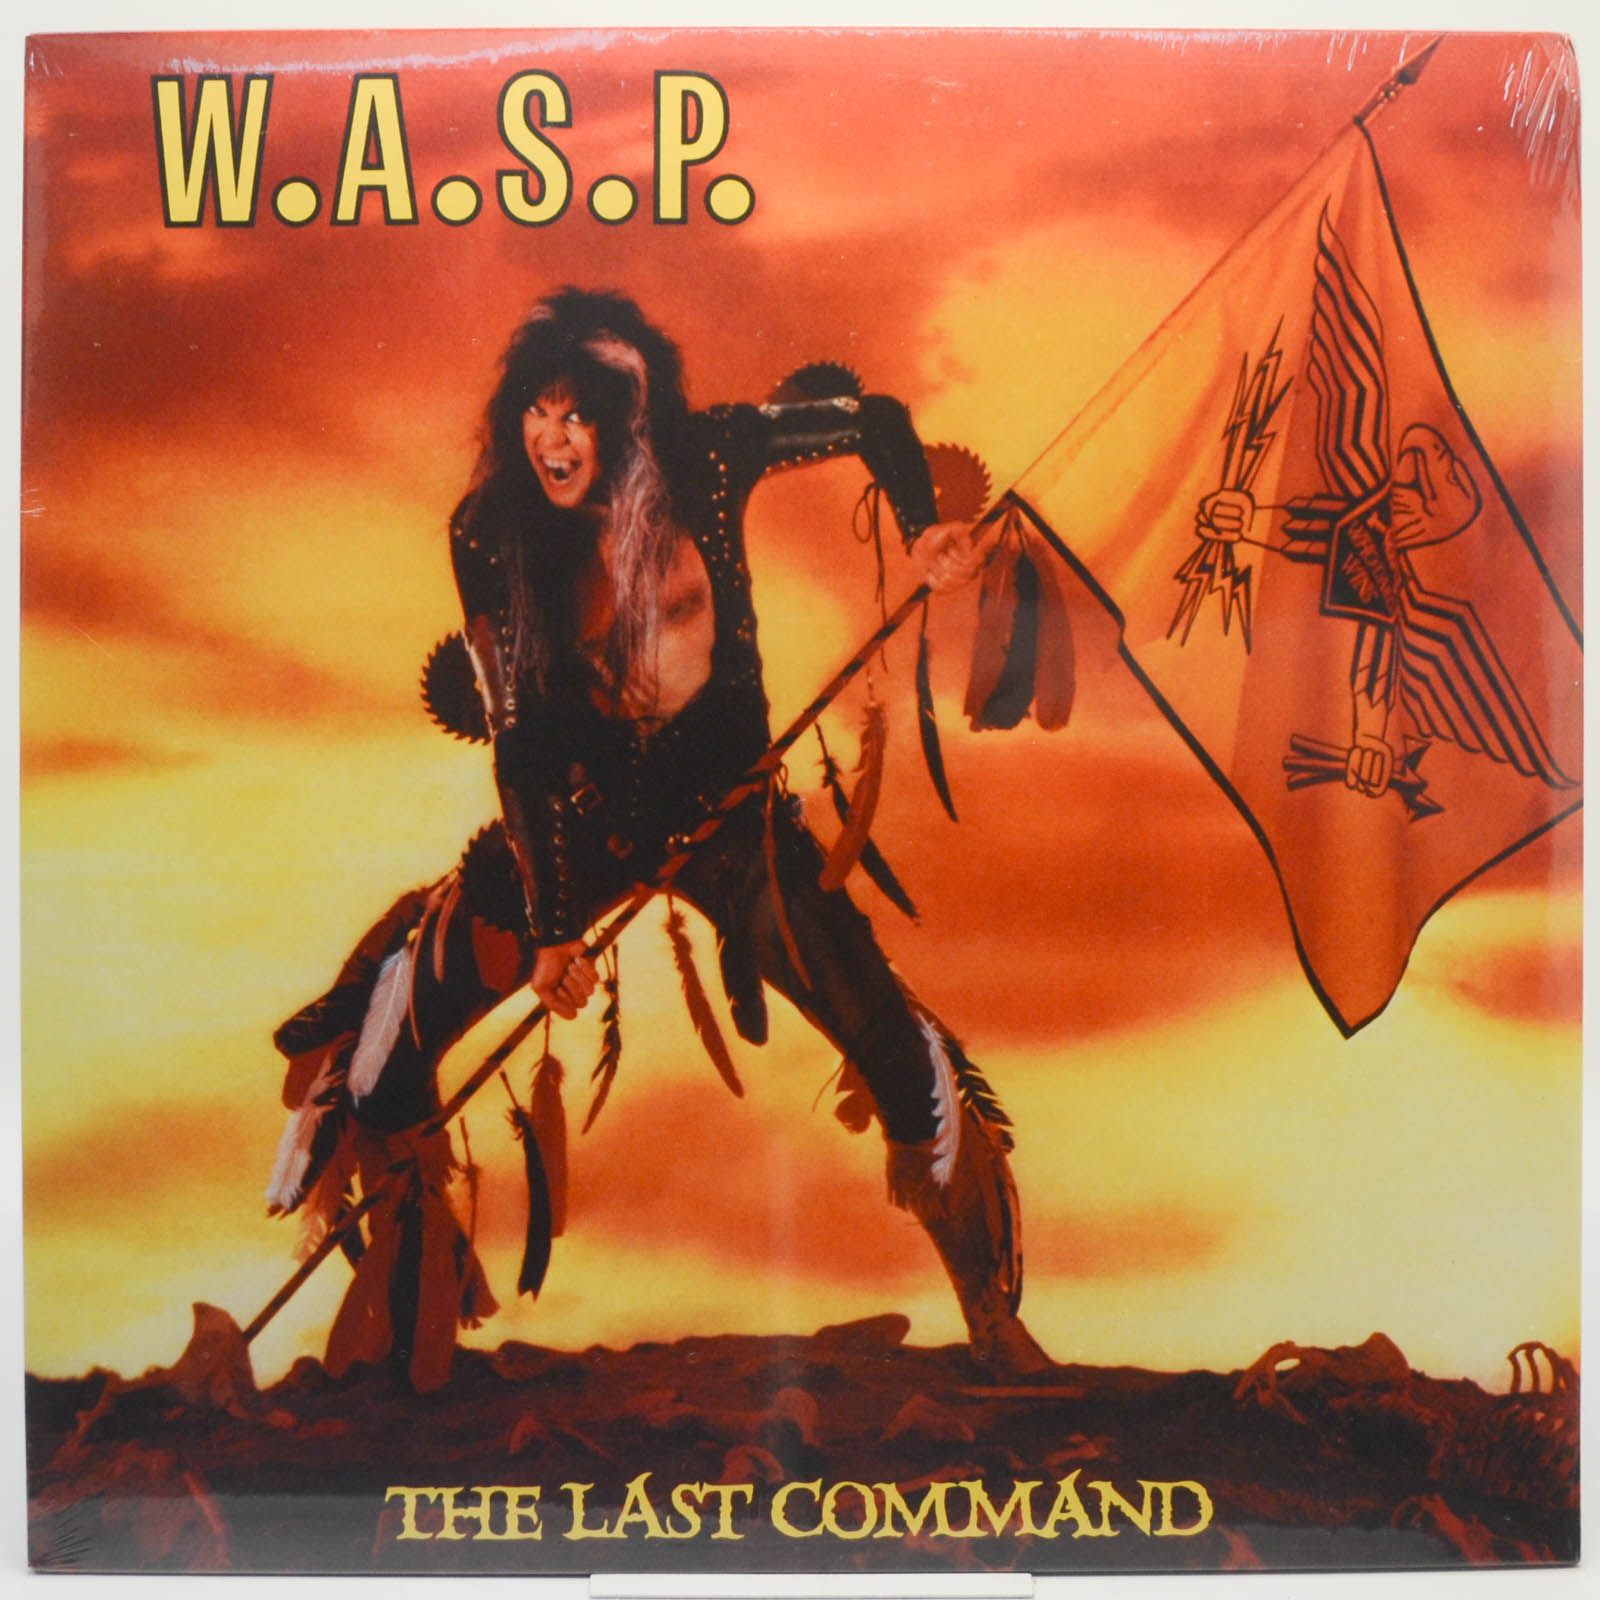 W.A.S.P. — The Last Command, 1987